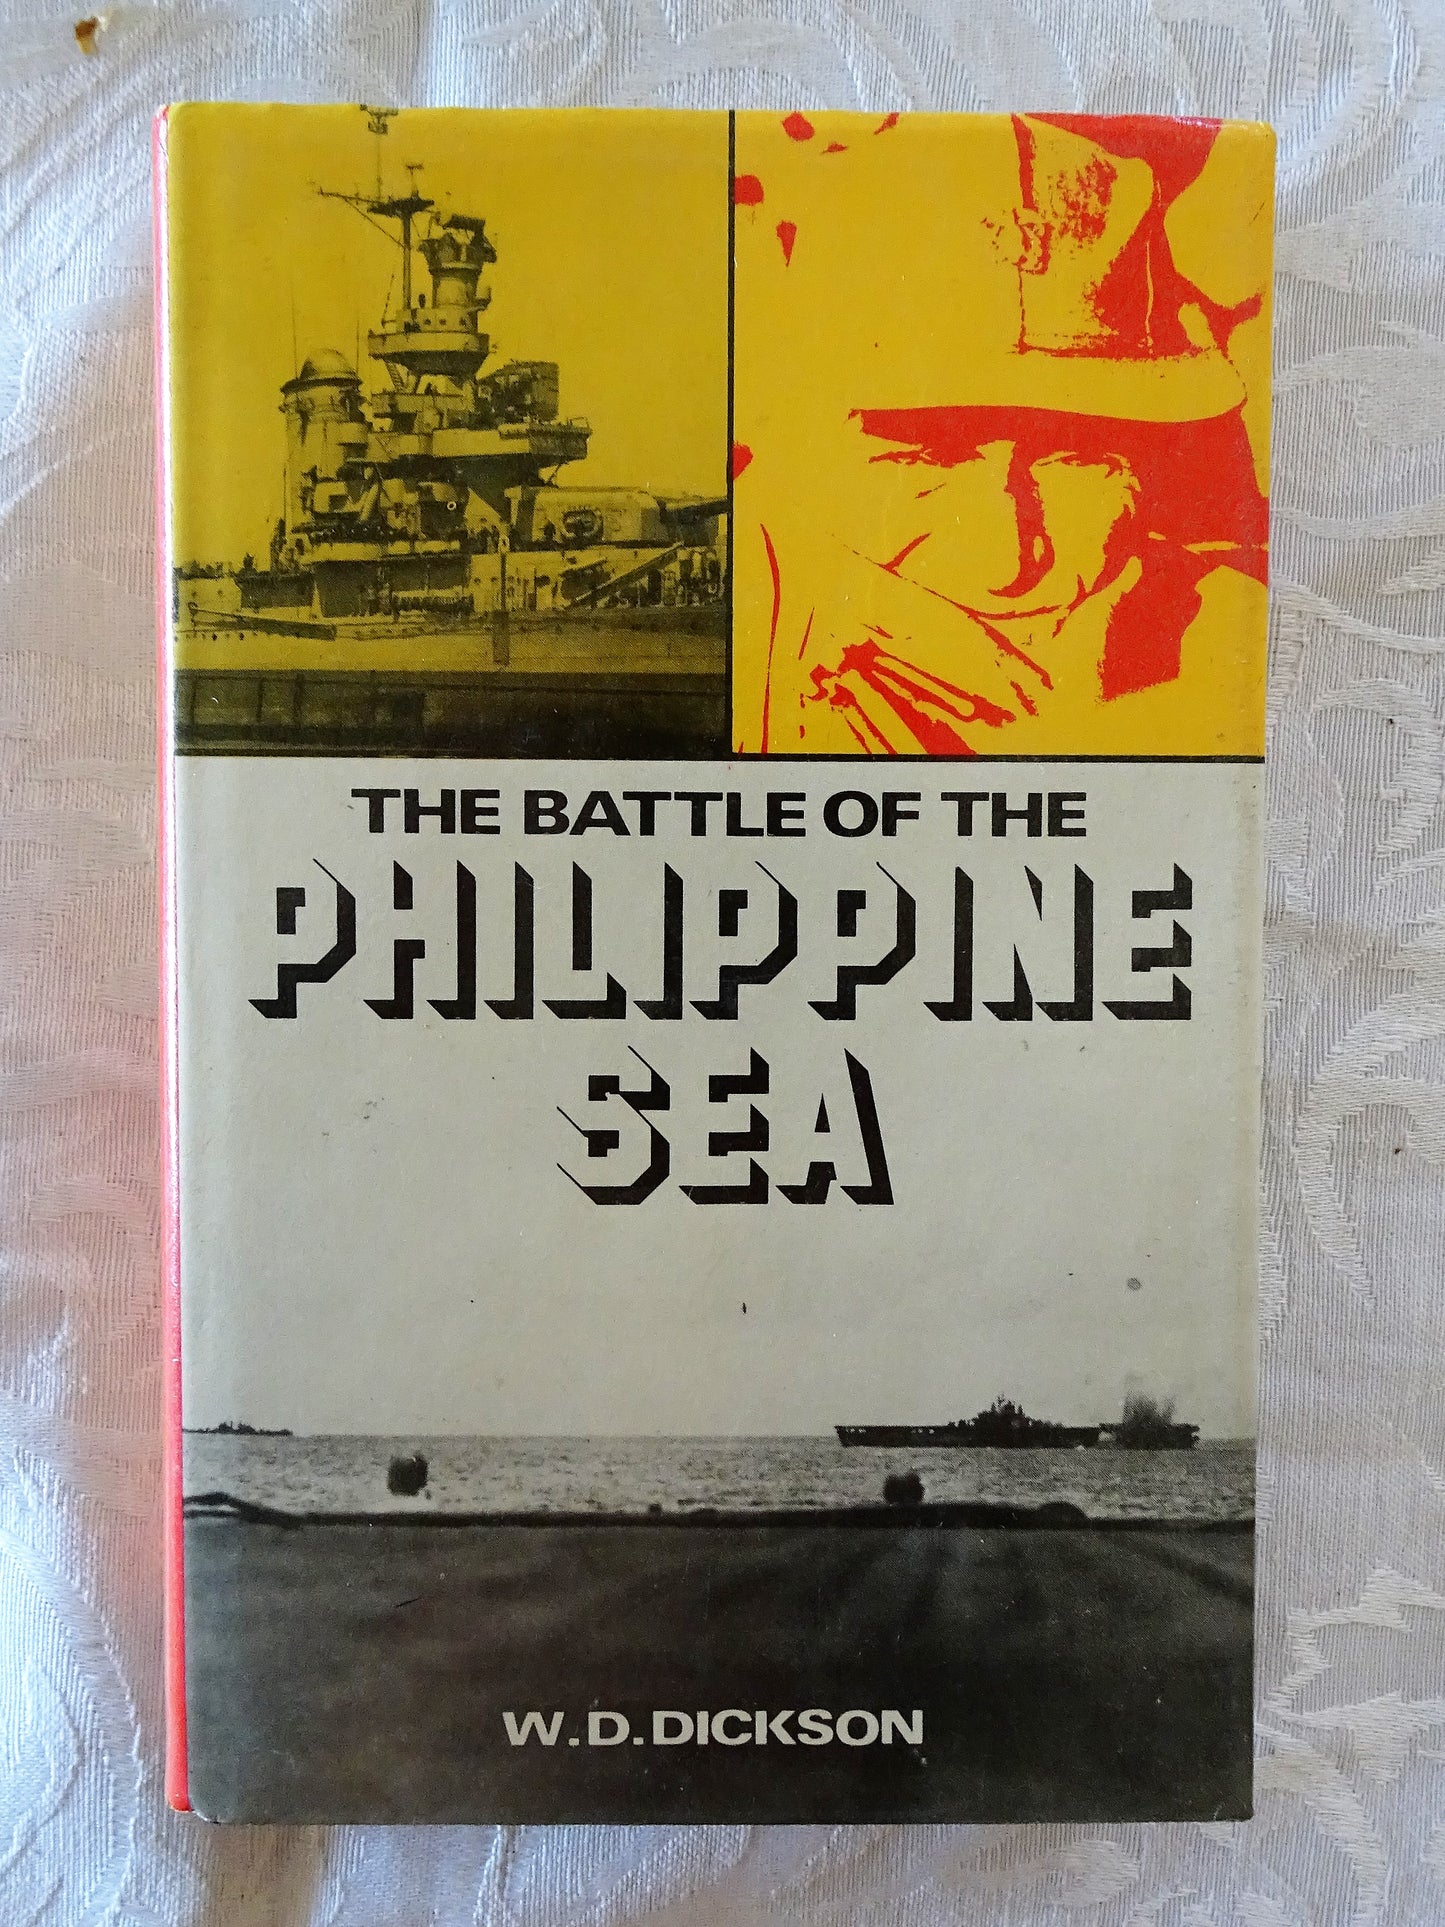 The Battle of the Philippine Sea by W. D. Dickson